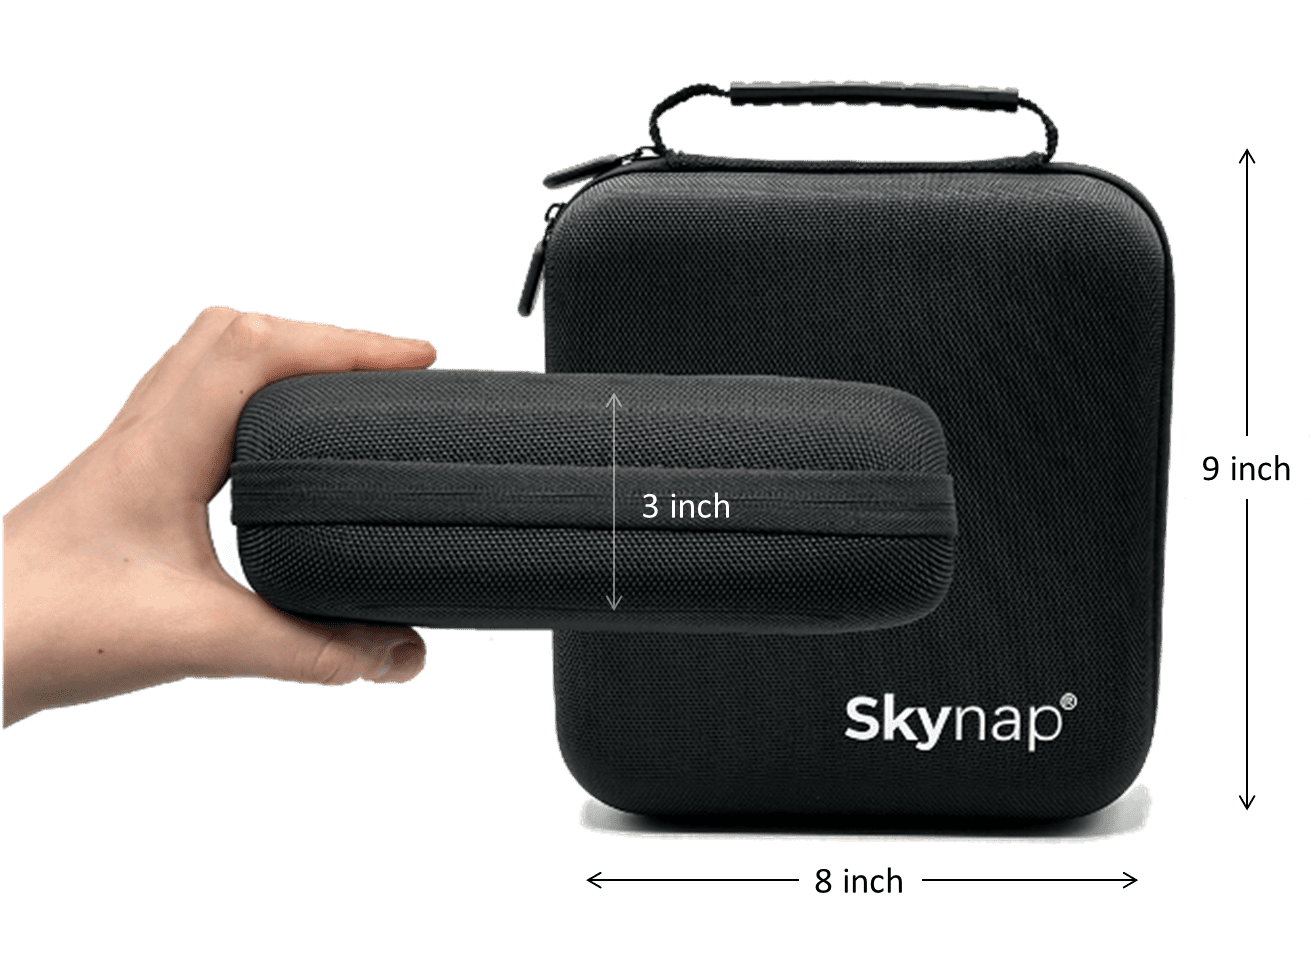 Skynap Case with Dimensions